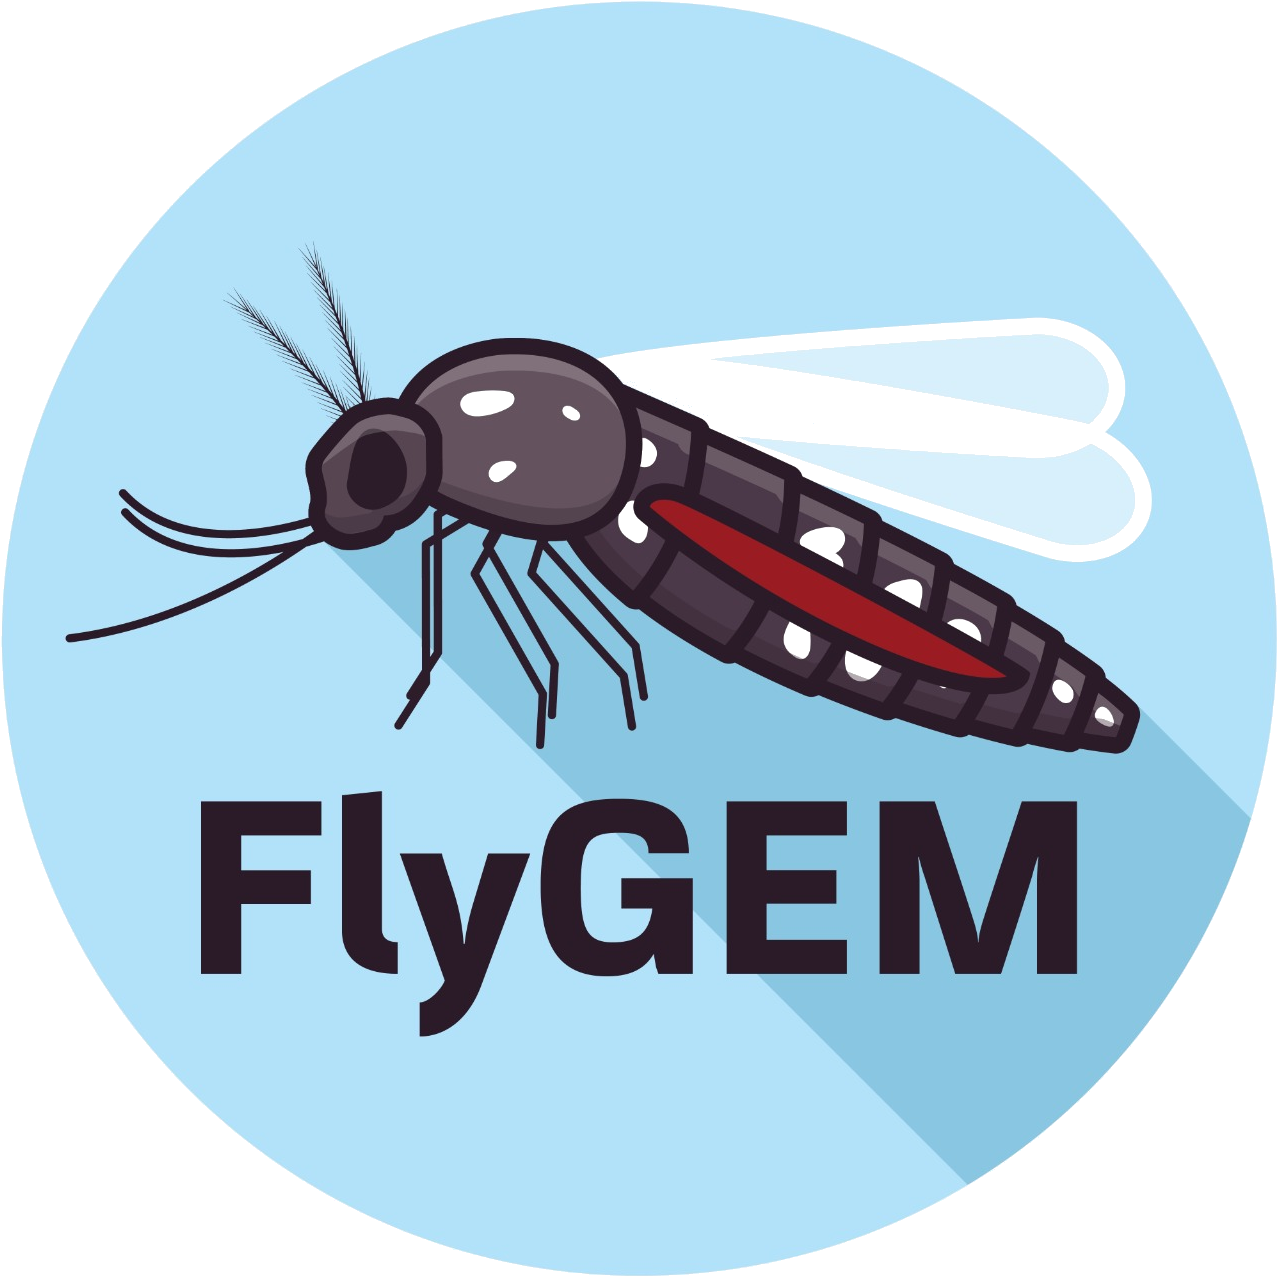 Mosquito Vector Graphic Fly G E M PNG